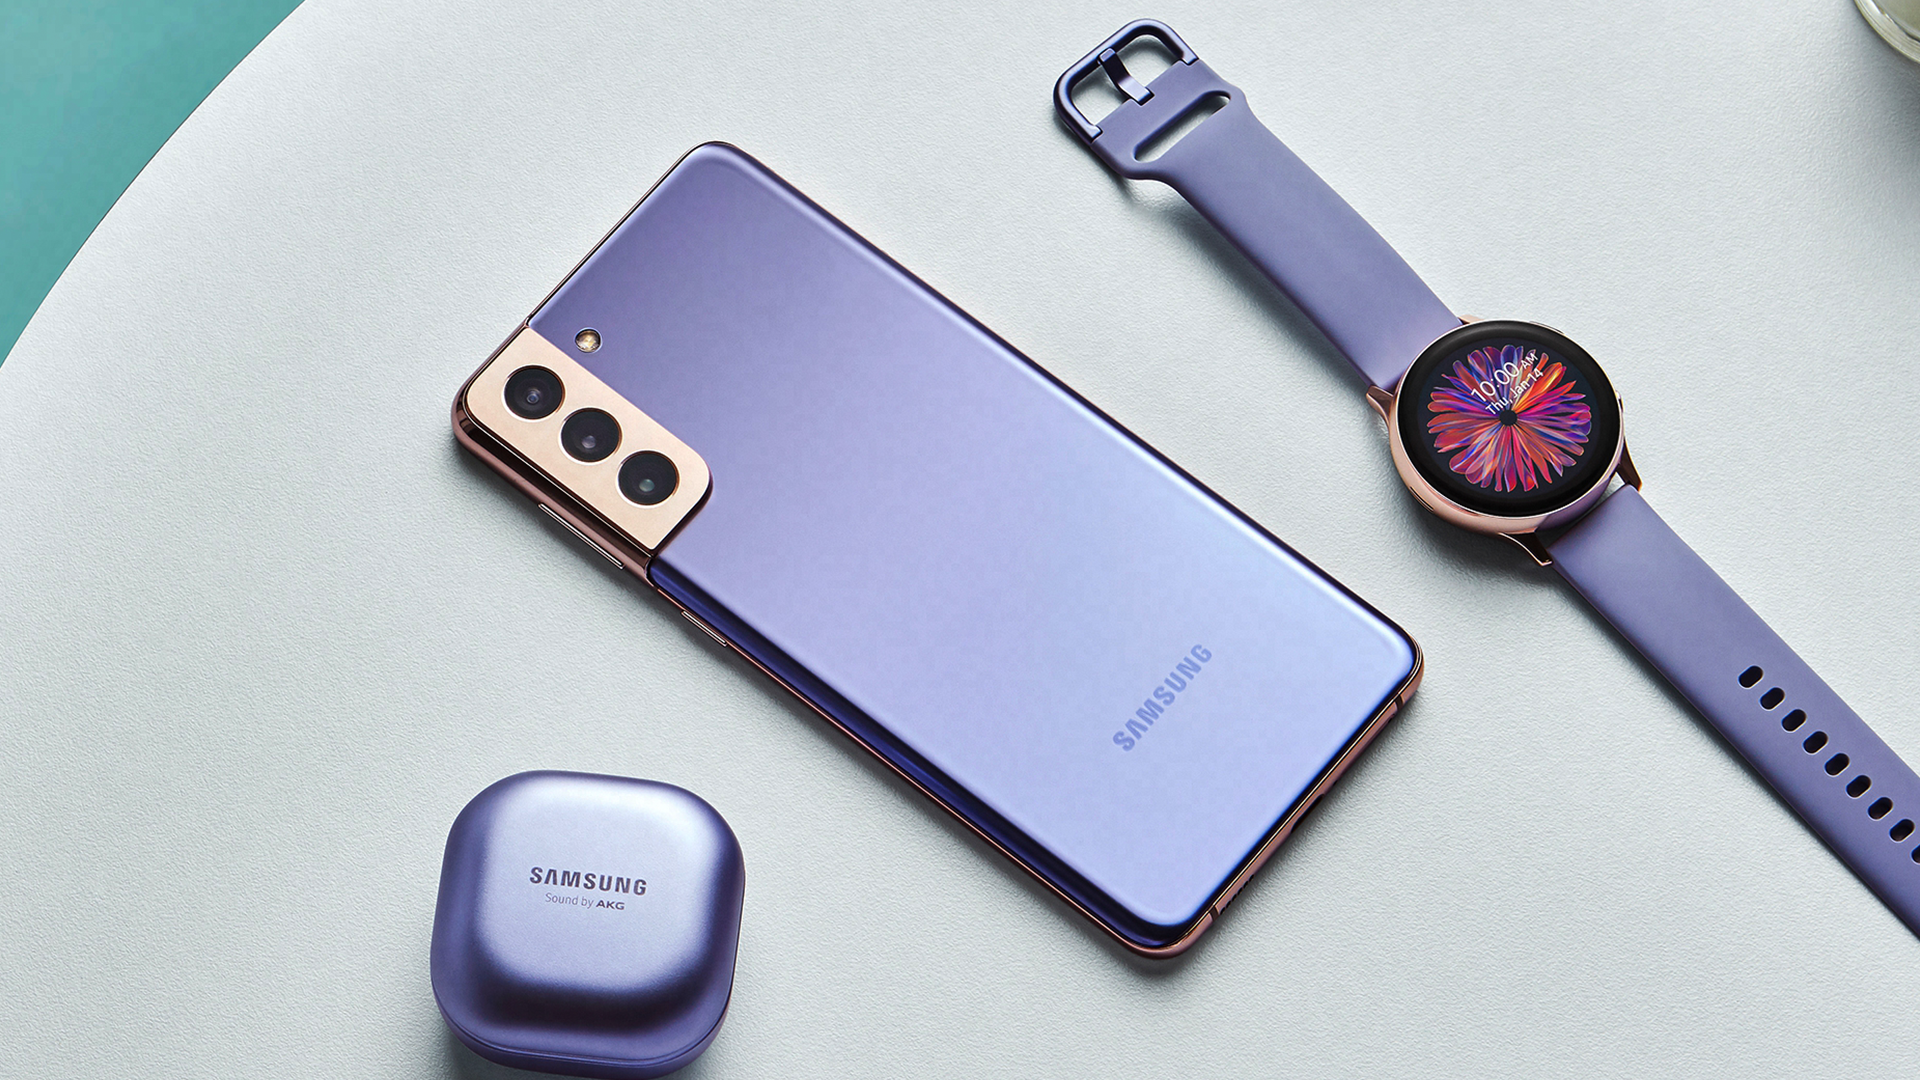 The Samsung Galaxy S21+ with the Galaxy Buds Live and Galaxy Watch 3.